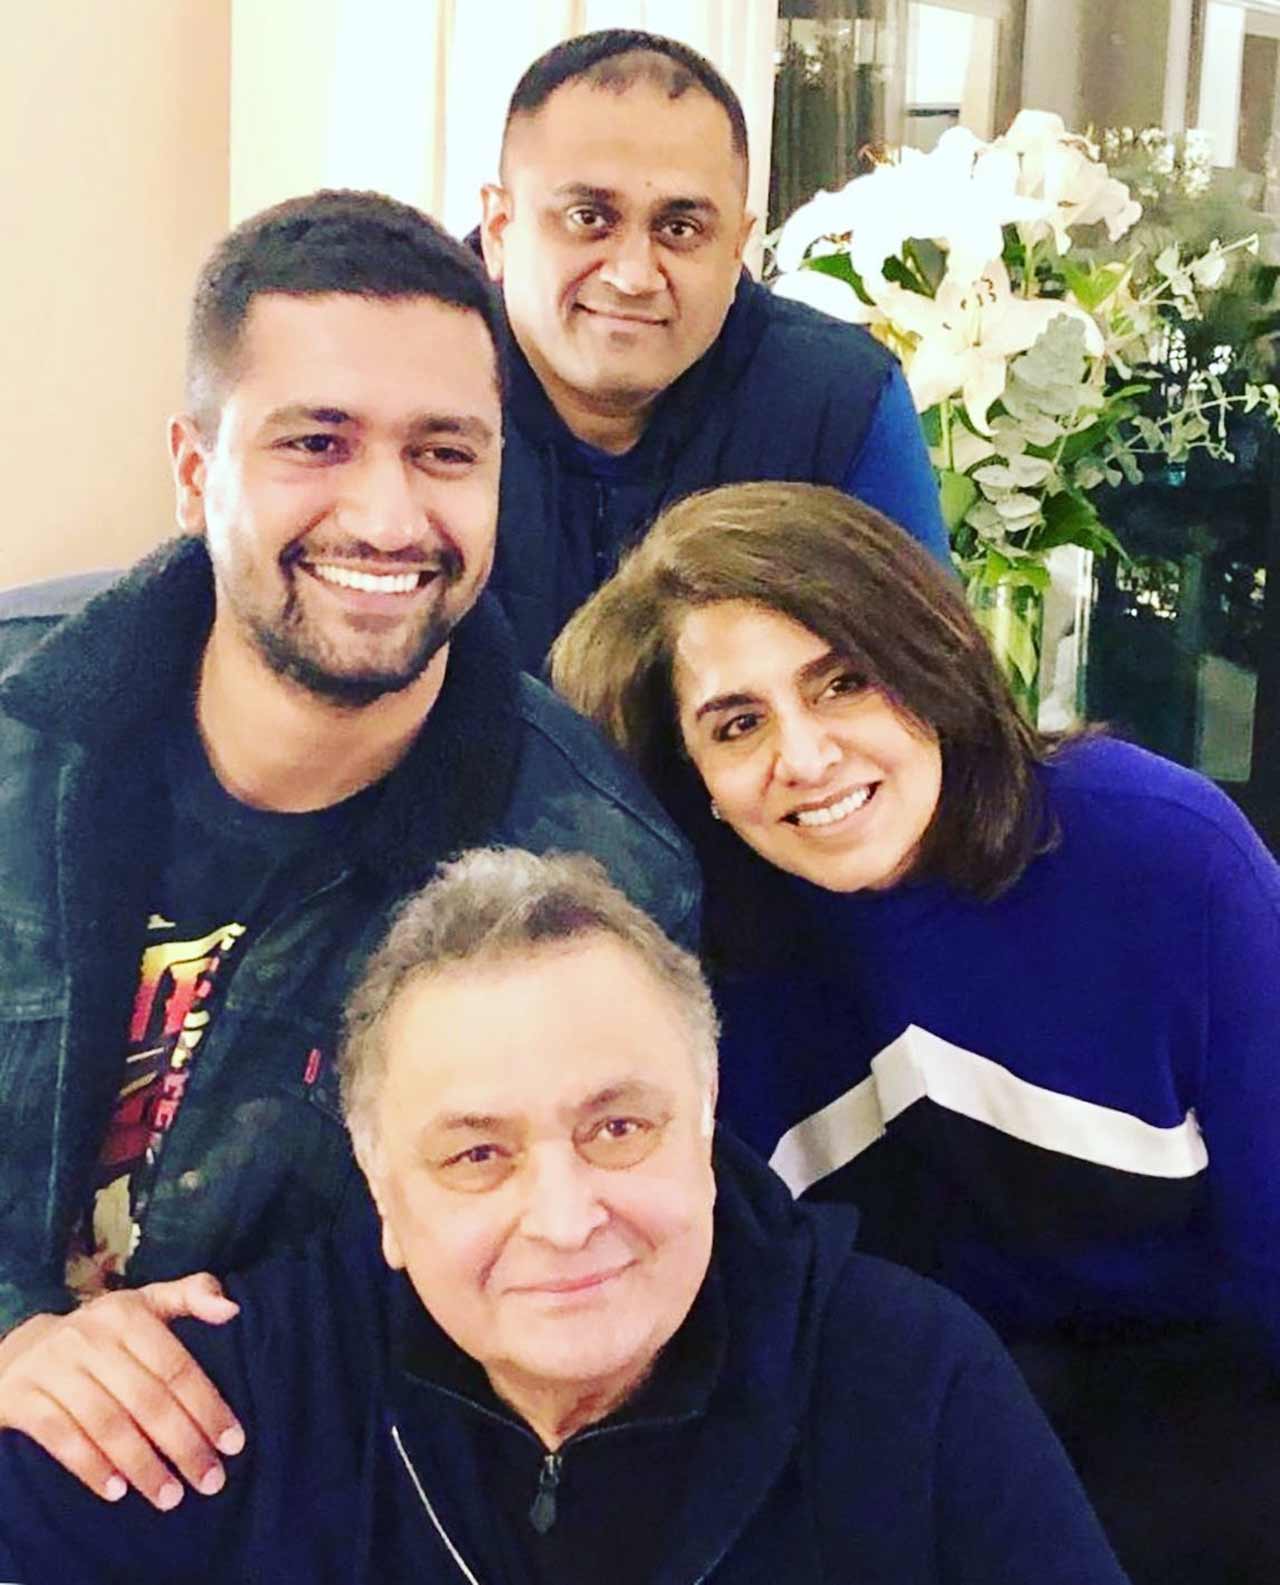 Rishi Kapoor, on the work front, was recently seen in 'Sharmaji Namkeen'. The actor, who has to undergo treatment in the middle of his shooting days, couldn't get back to the sets again. Paresh Rawal filled into the actor's shoes and shot the remaining scenes for the film.
Pictured: Vicky Kaushal, who was in New York to ring in his birthday, met up with Rishi and Neetu Kapoor.